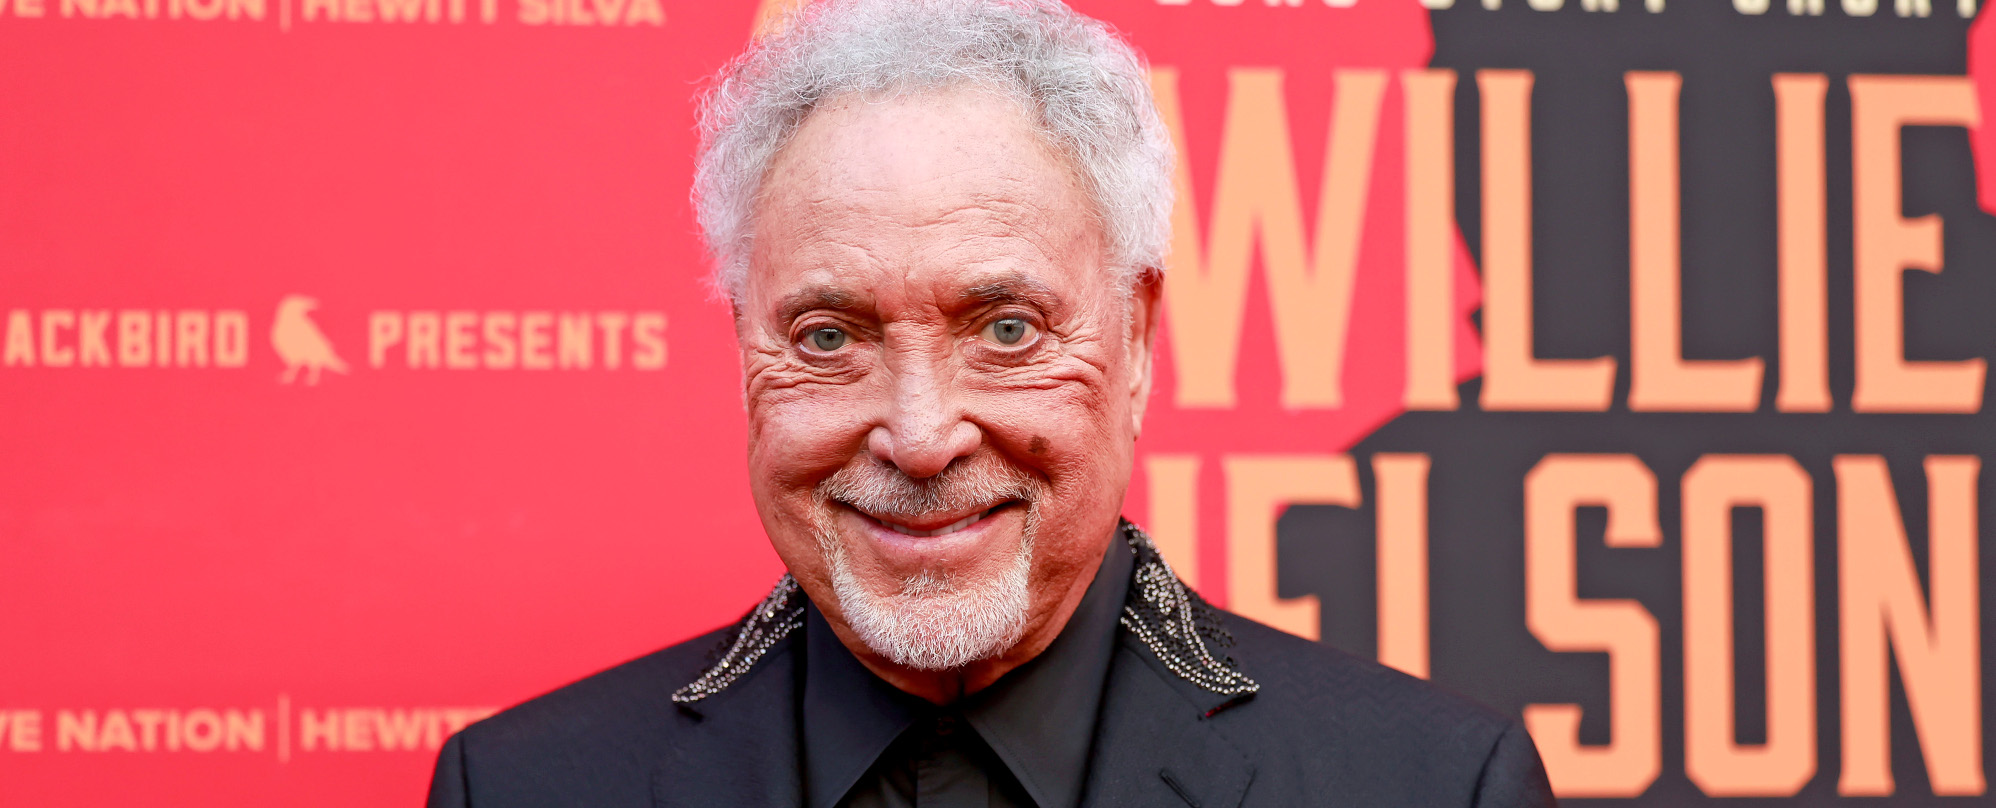 3 Songs You Didn’t Know Crooner Tom Jones Wrote for His Giant Voice